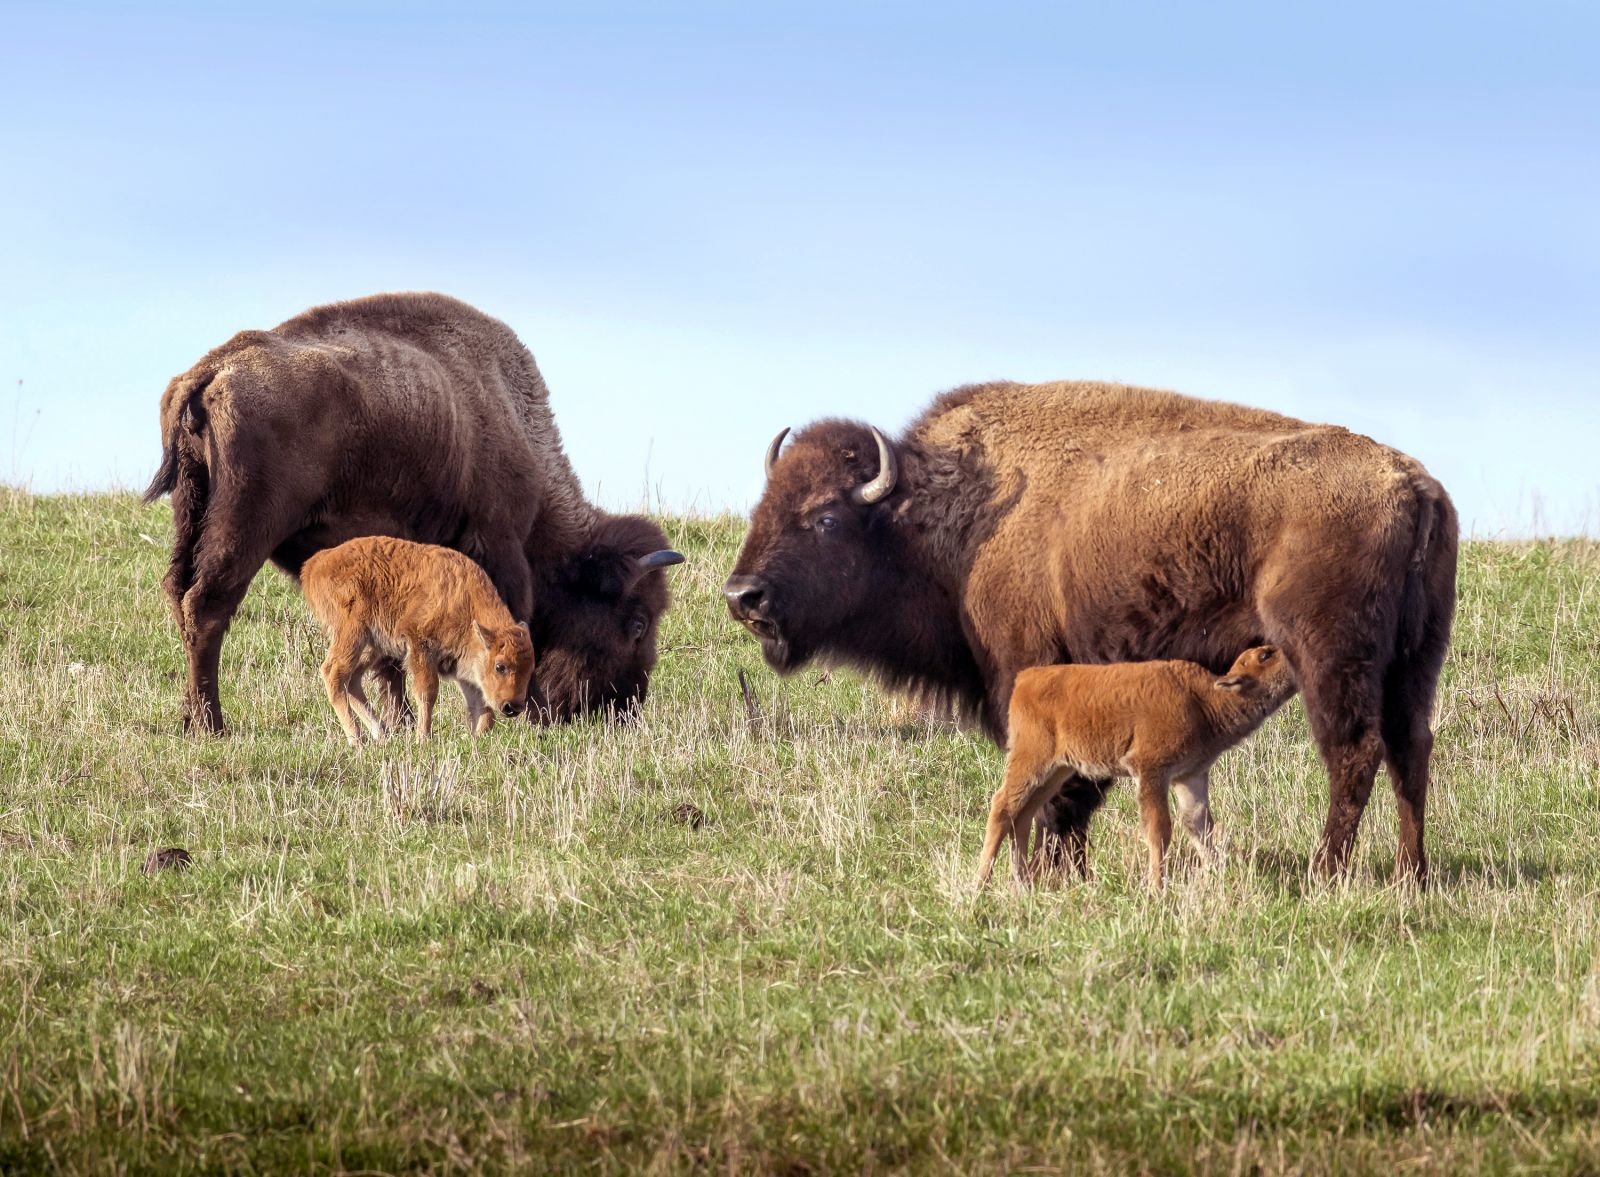 Adult bison and calves at Nachusa Grasslands. Image property of The Nature Conservancy.